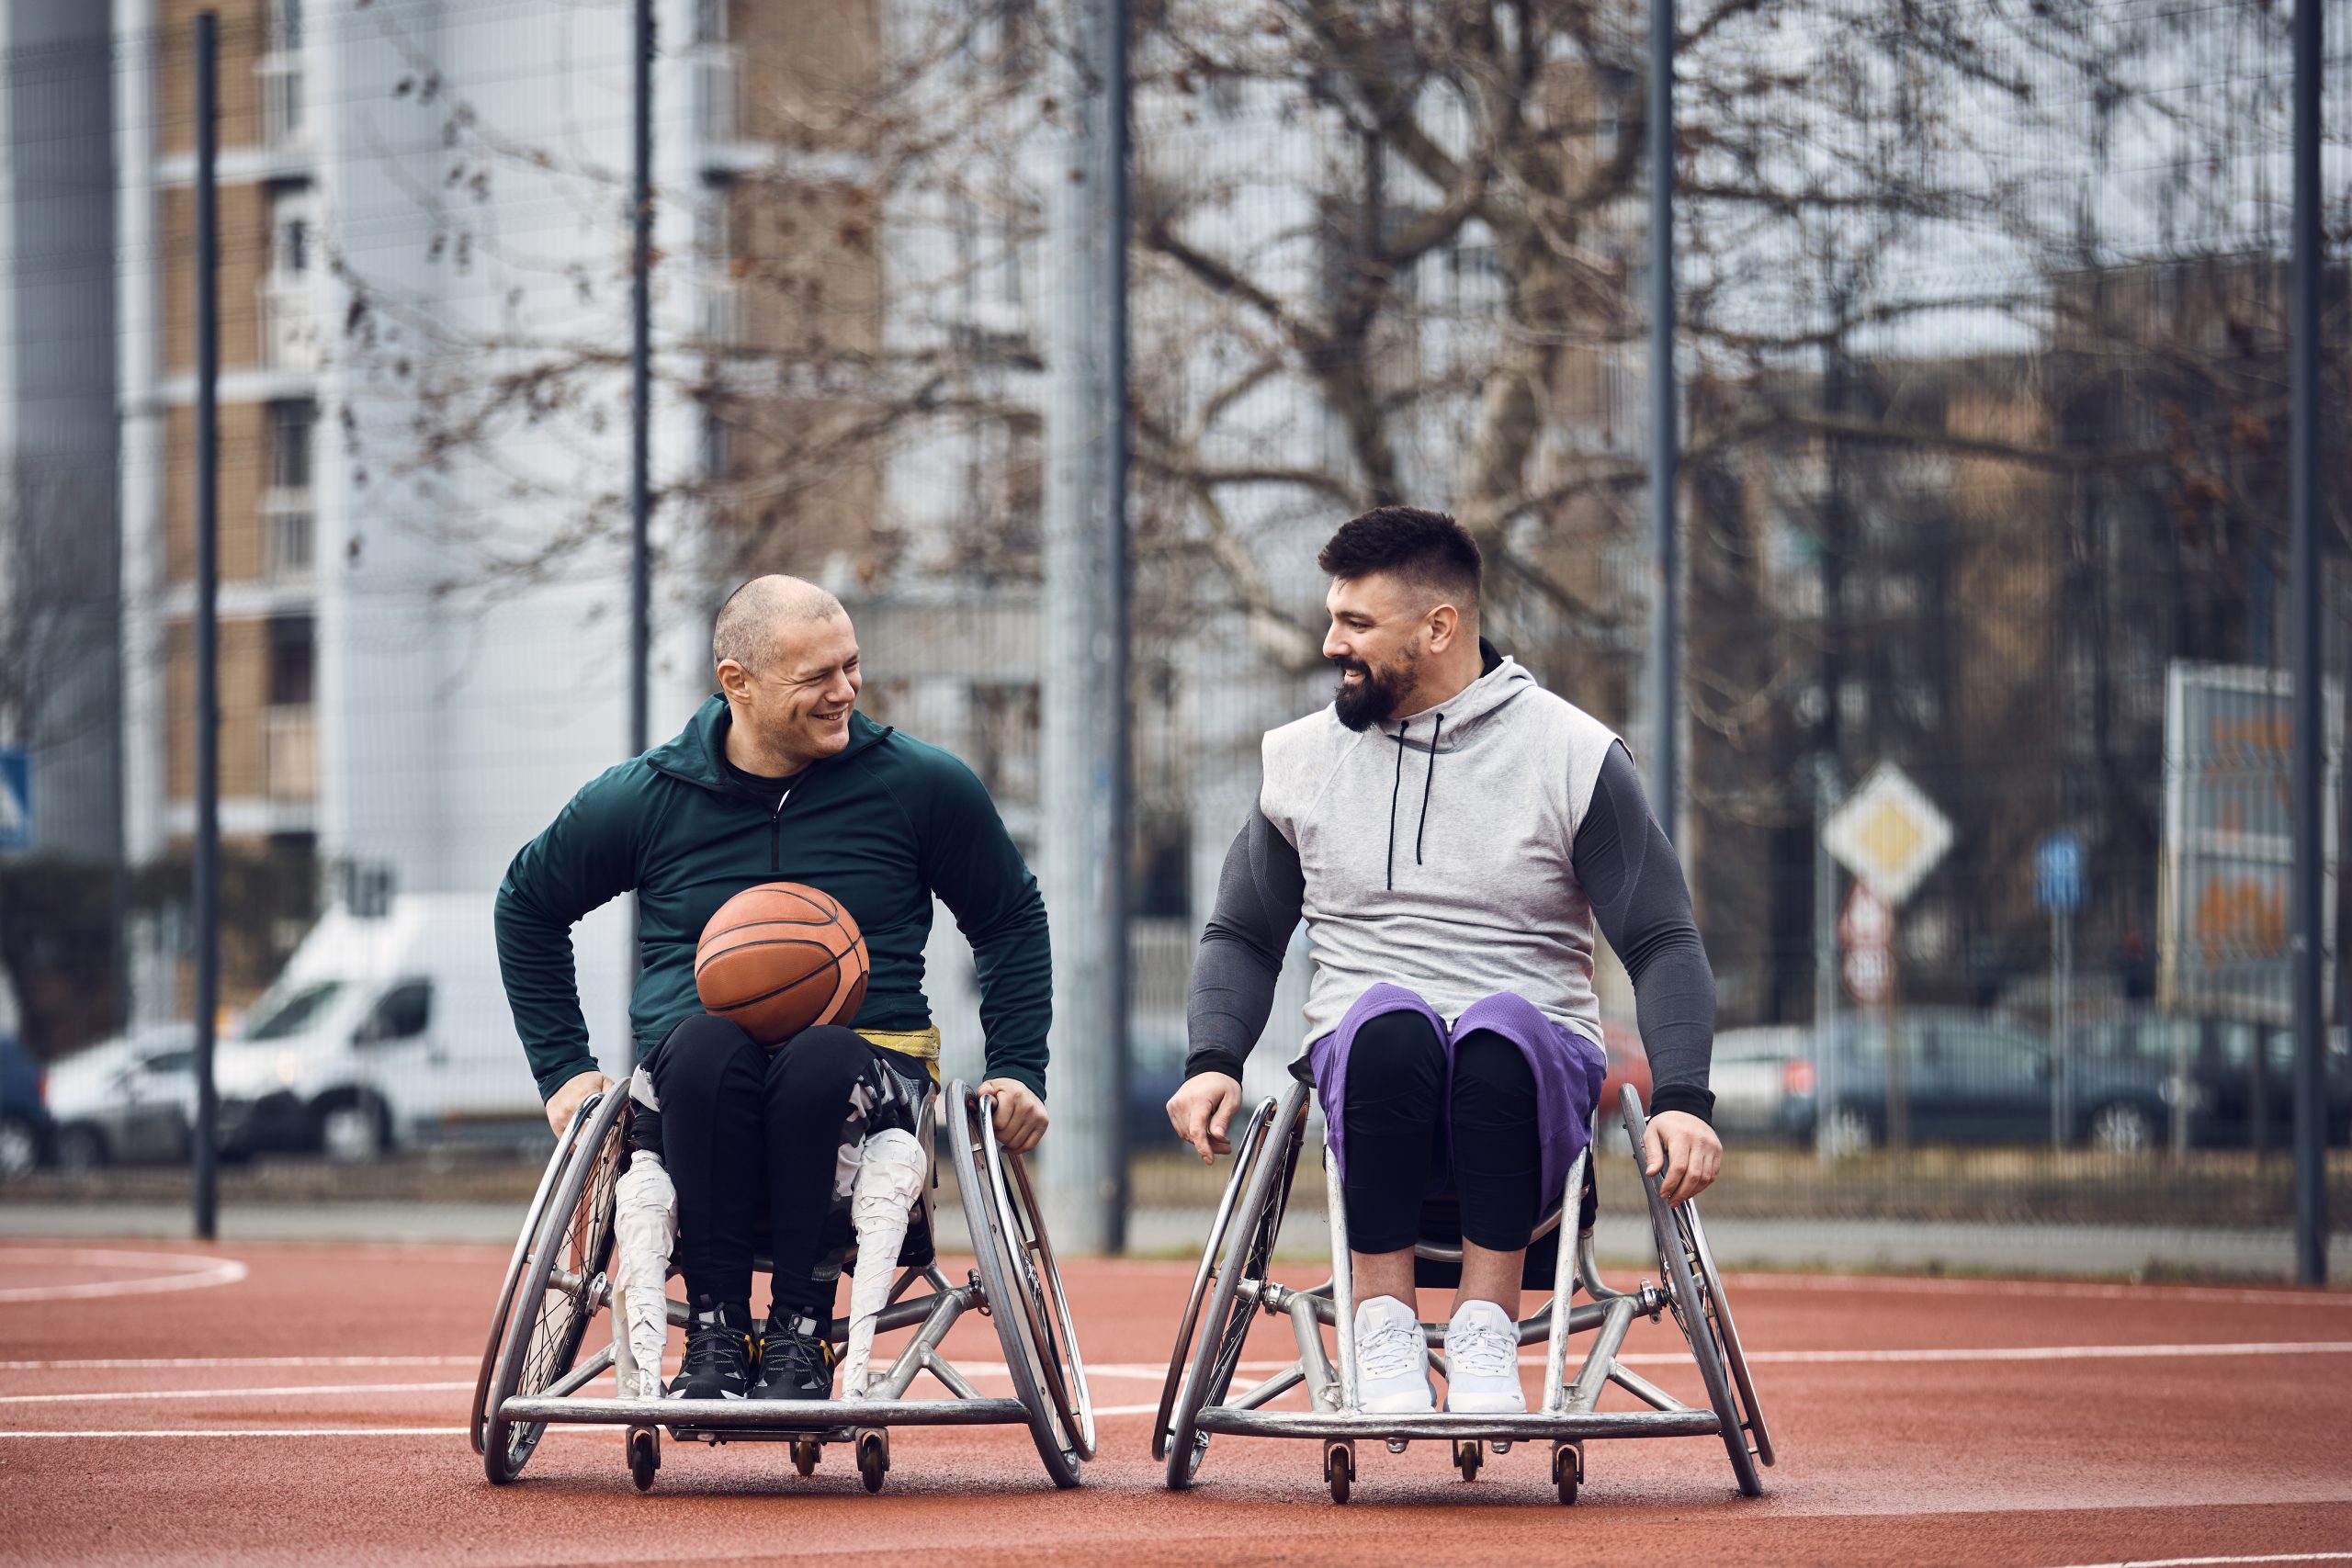 Two men in wheelchairs laugh together as they prepare for a game of wheelchair basketball together.